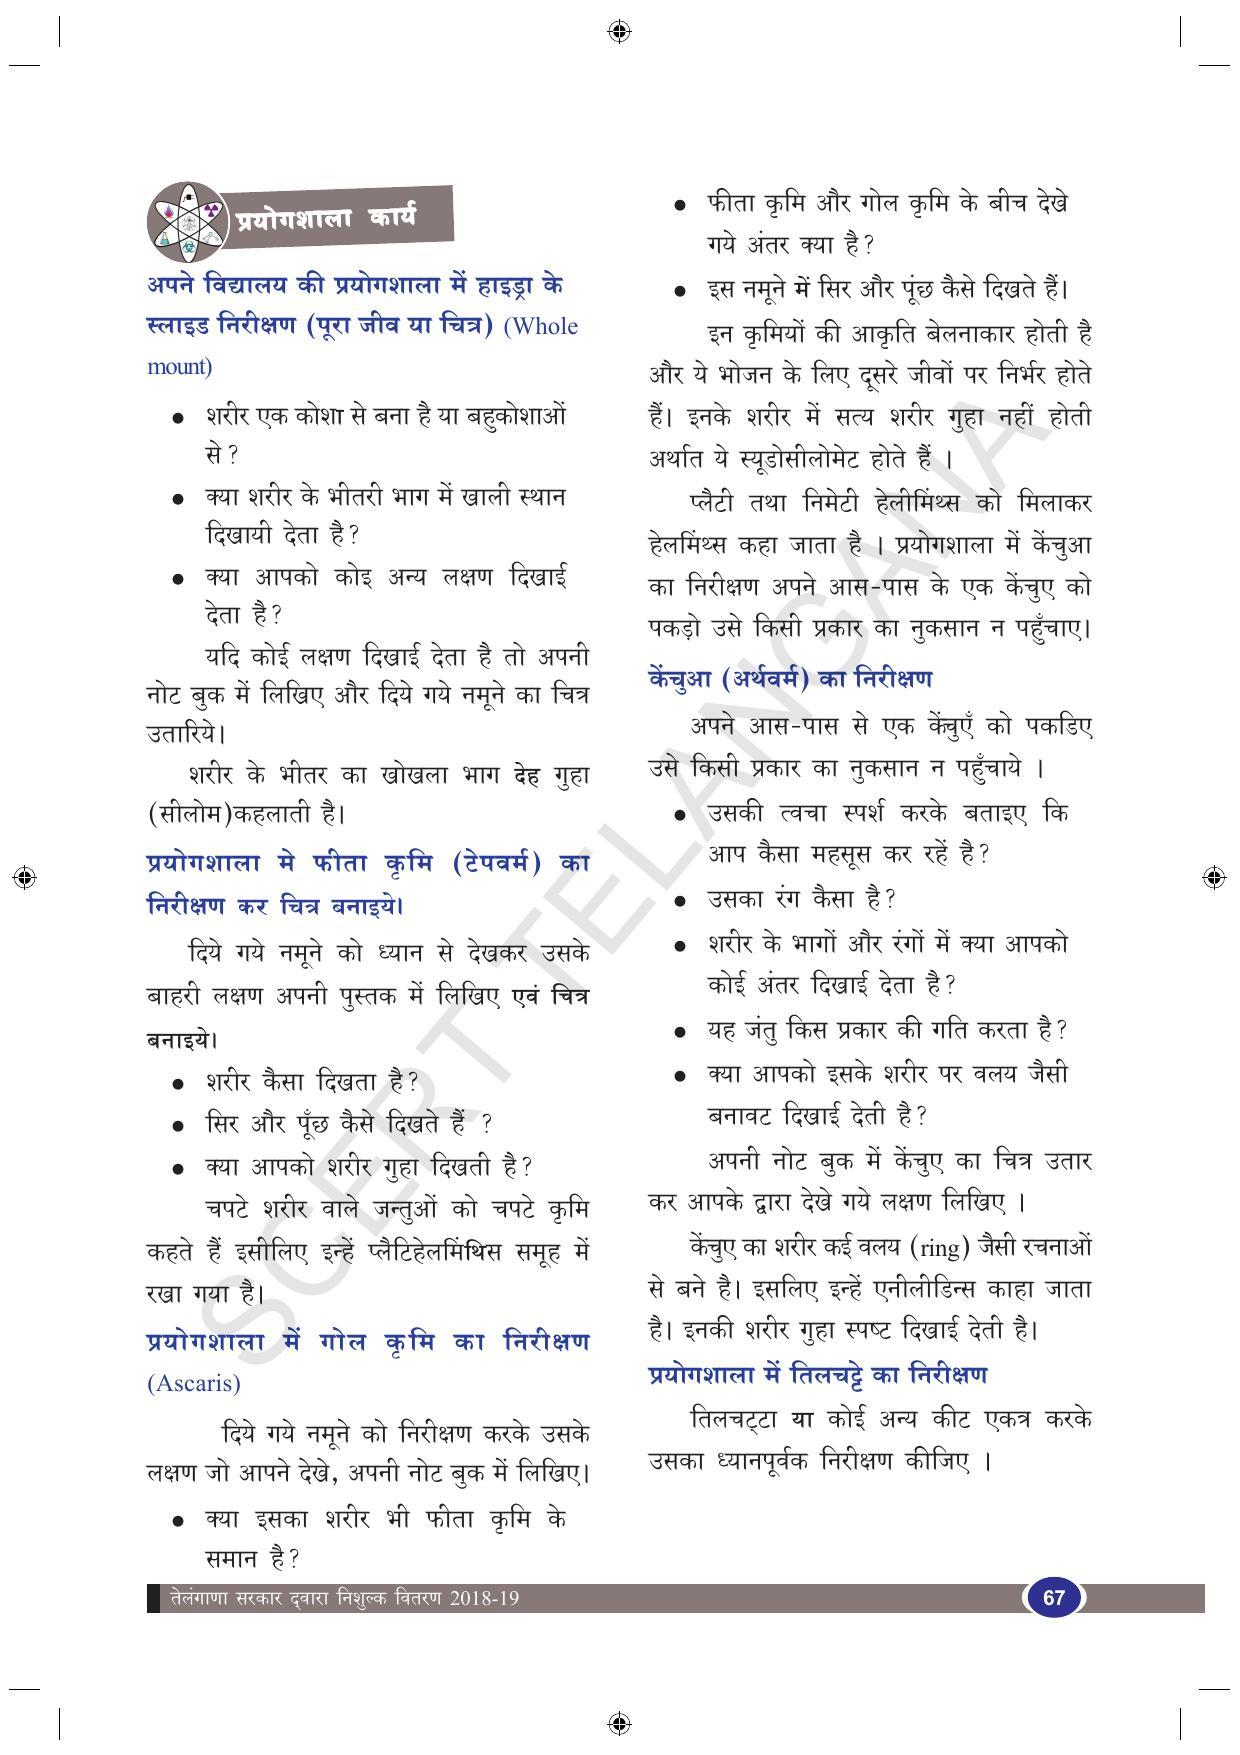 TS SCERT Class 9 Biological Science (Hindi Medium) Text Book - Page 79